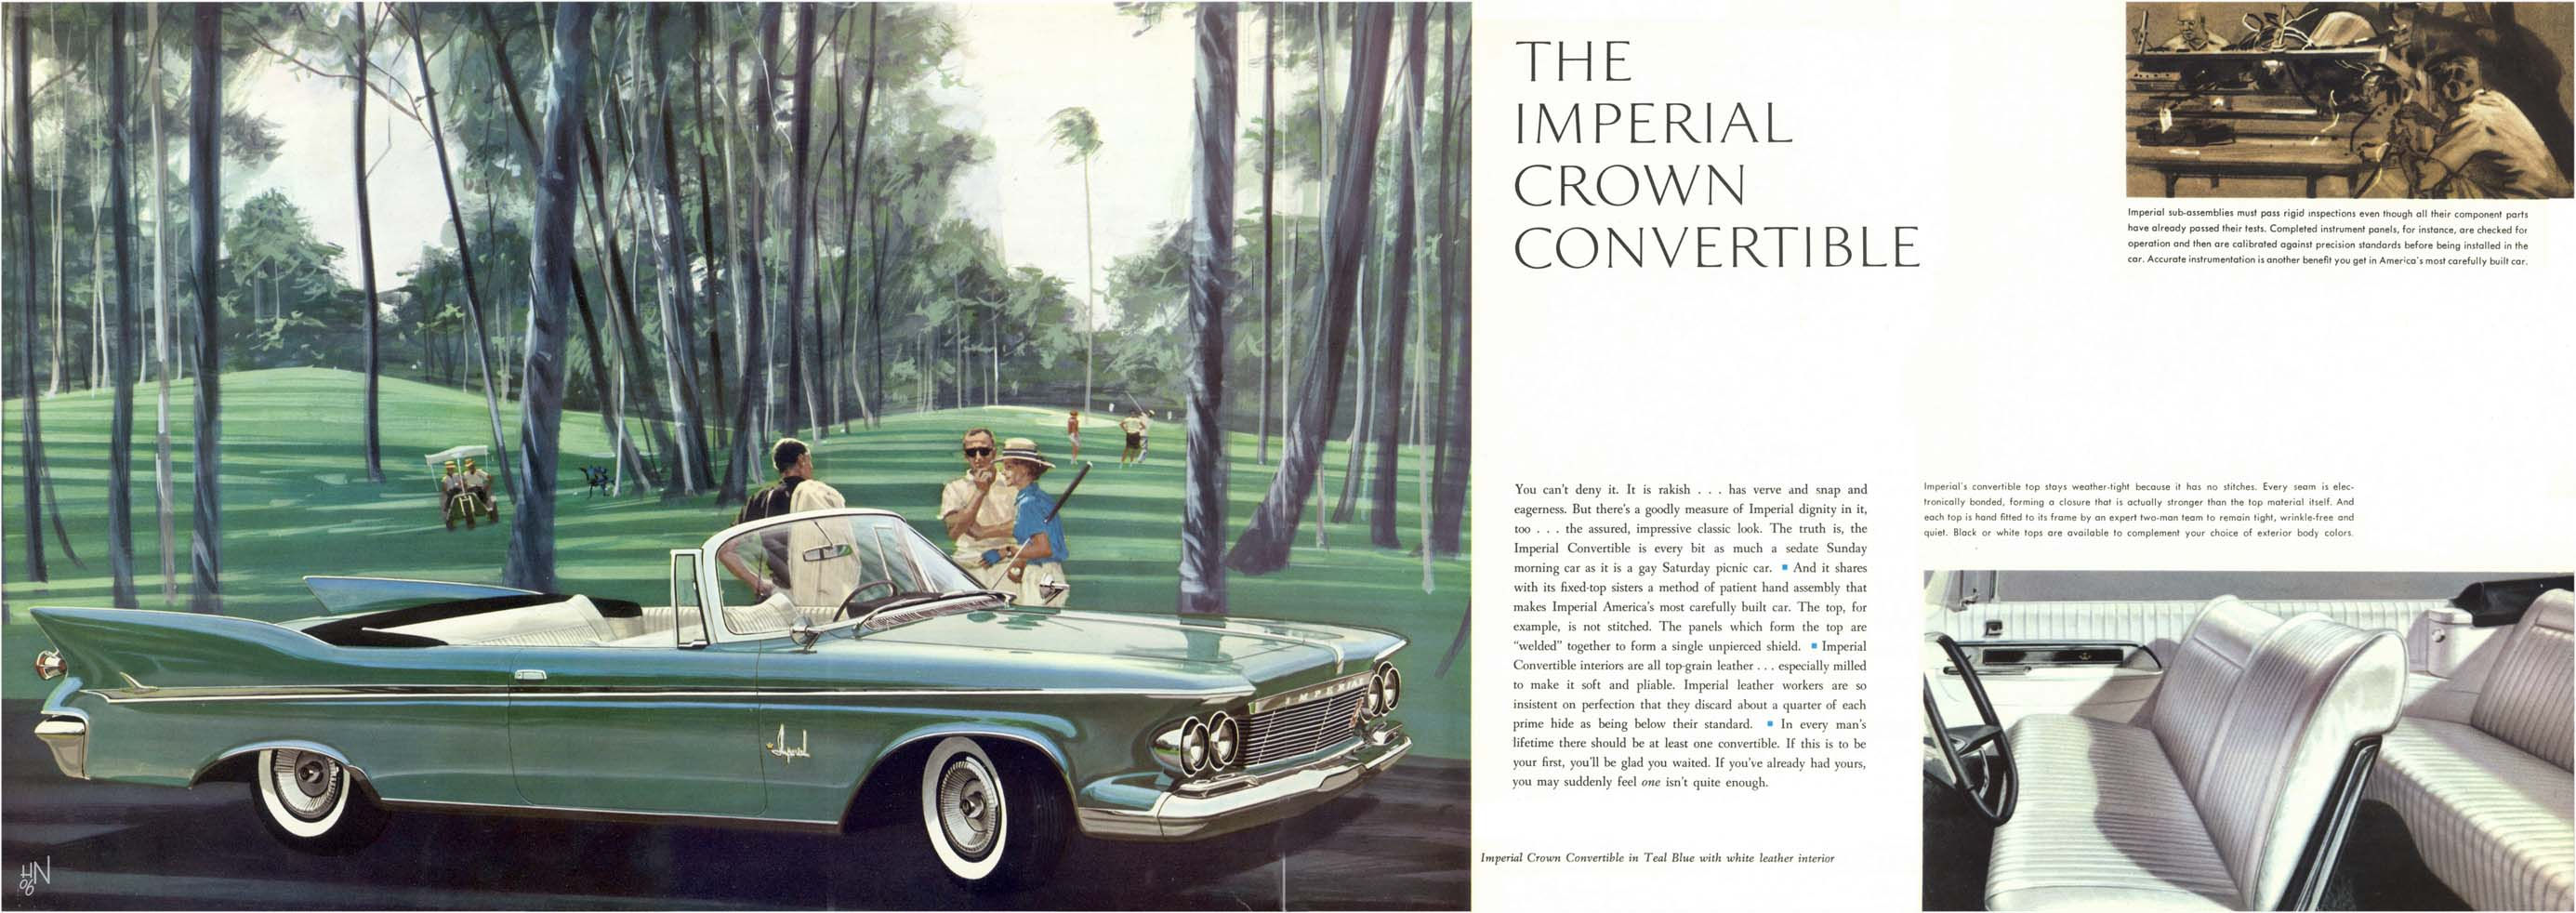 1961 Chrysler Imperial Brochure Page 8